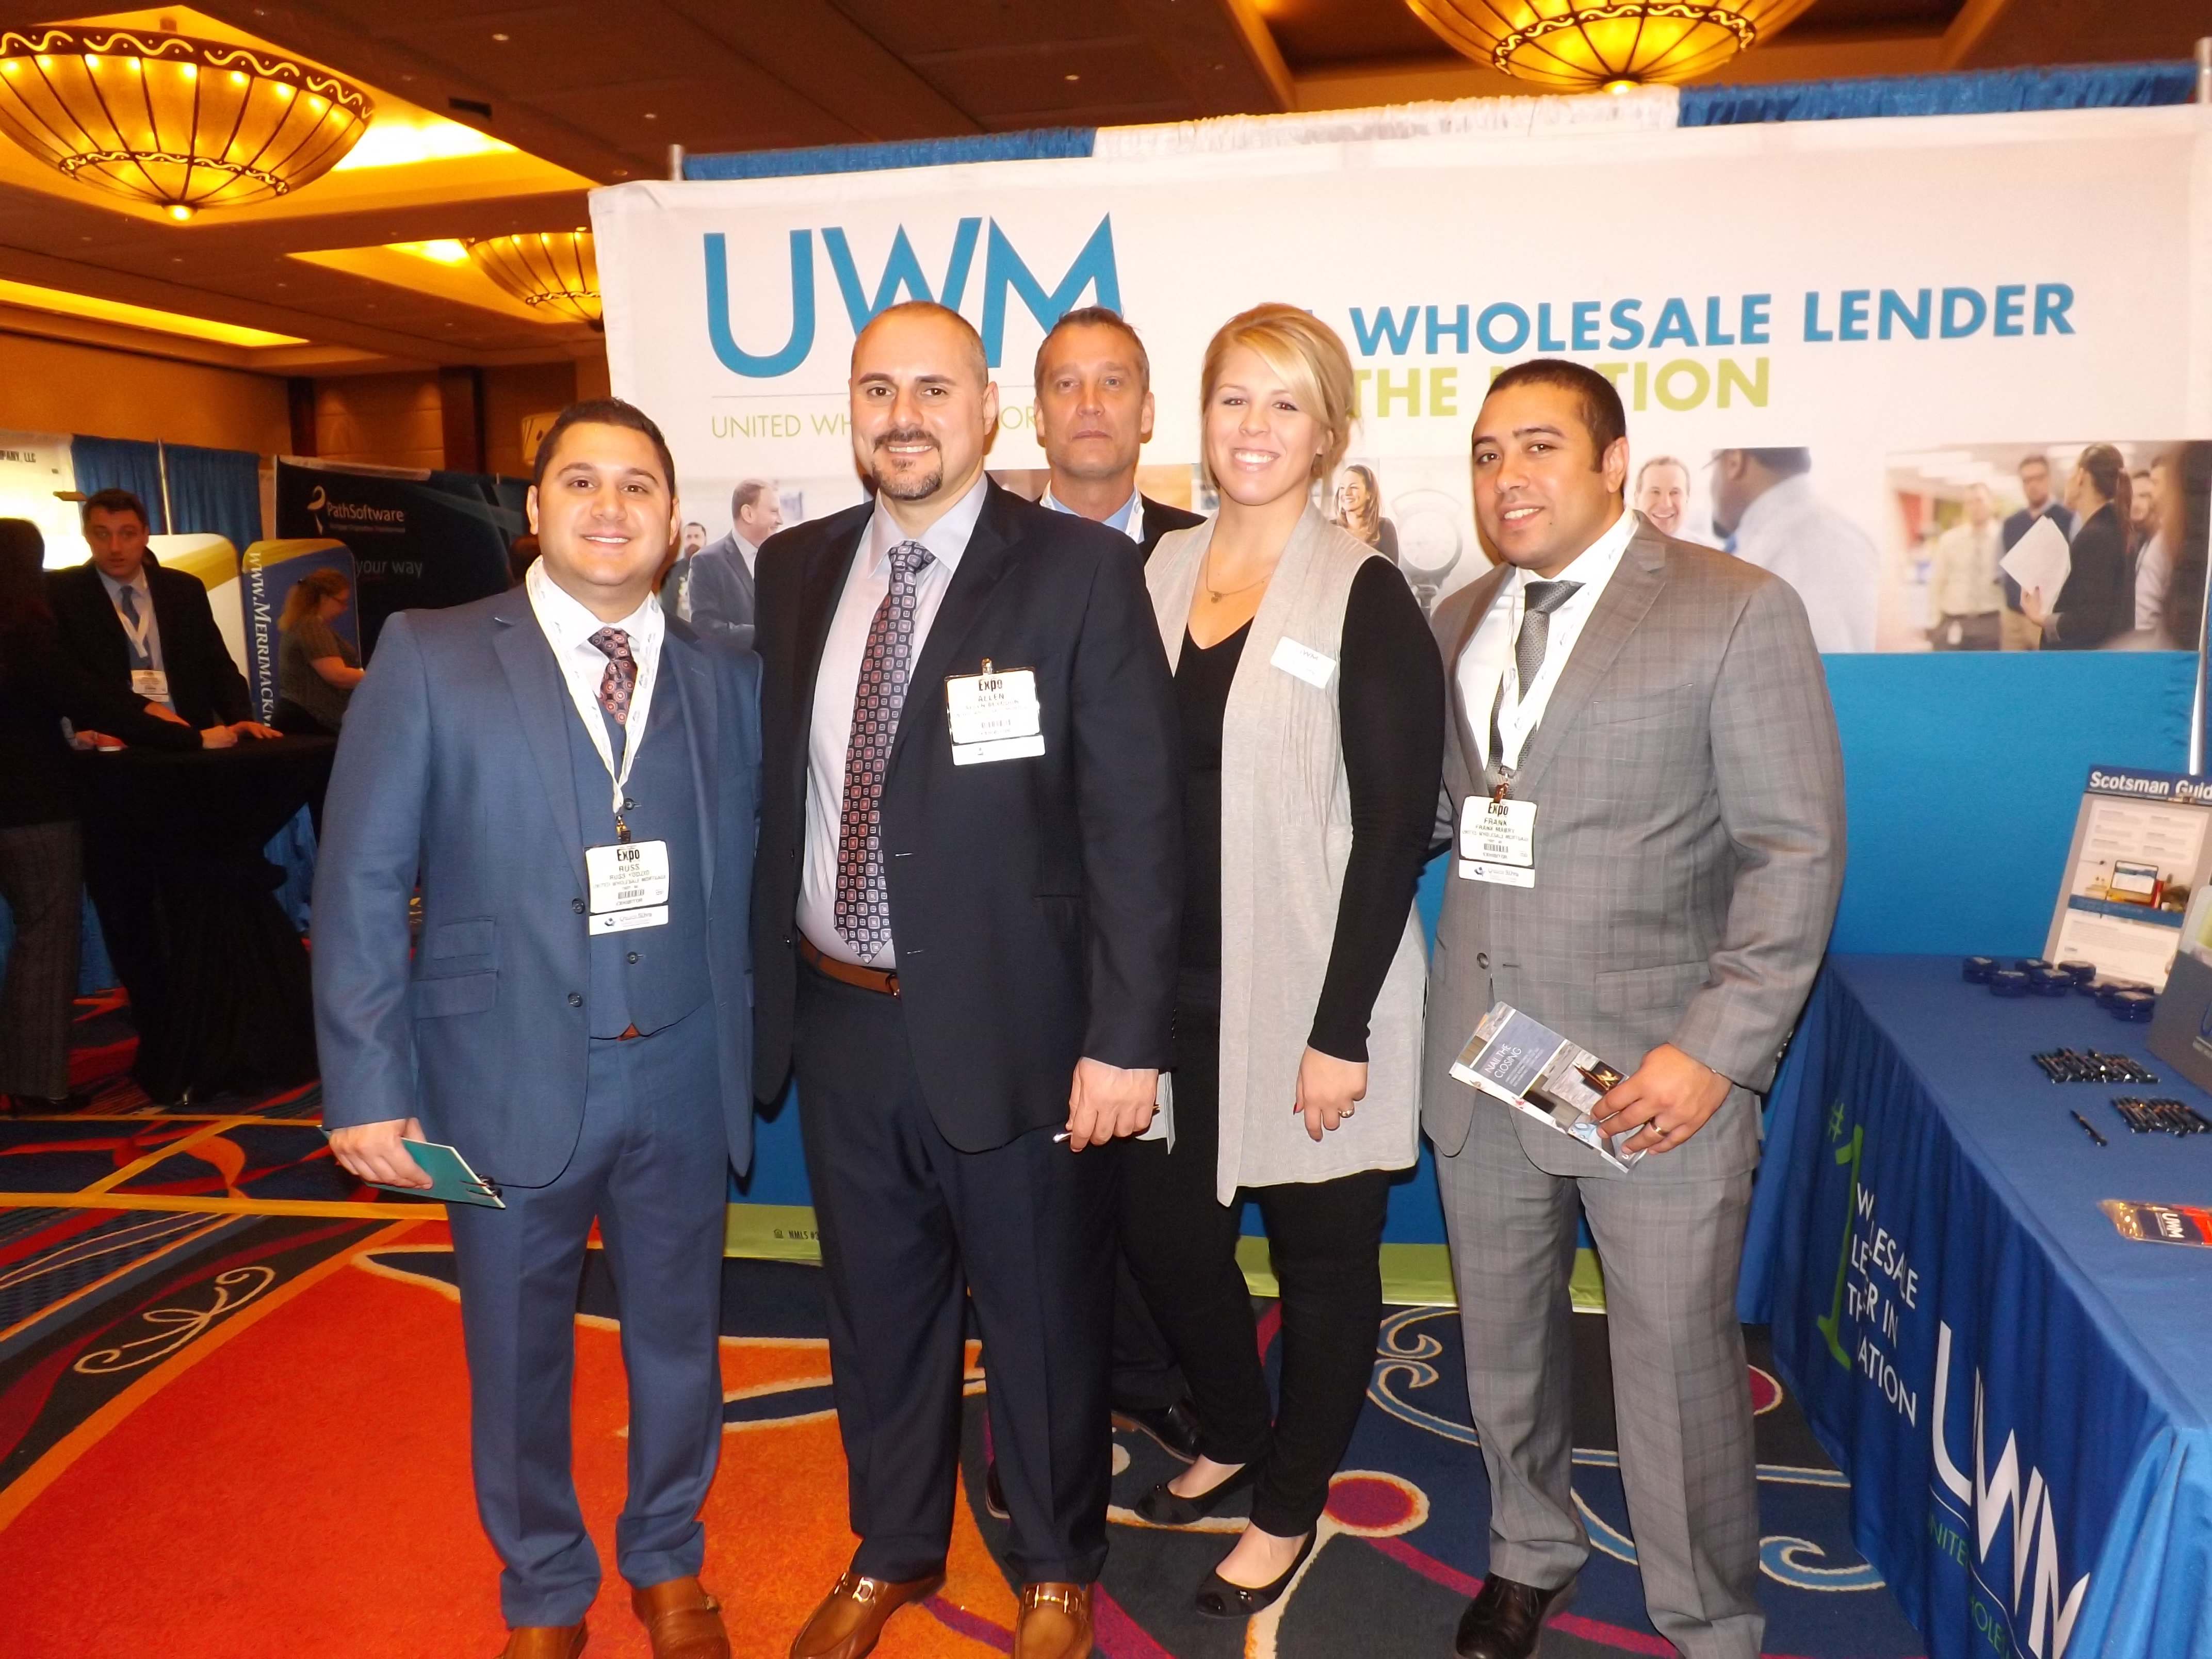 The crew from United Wholesale Mortgage (UWM) were on hand at the New England Mortgage Expo to detail their company's product offerings